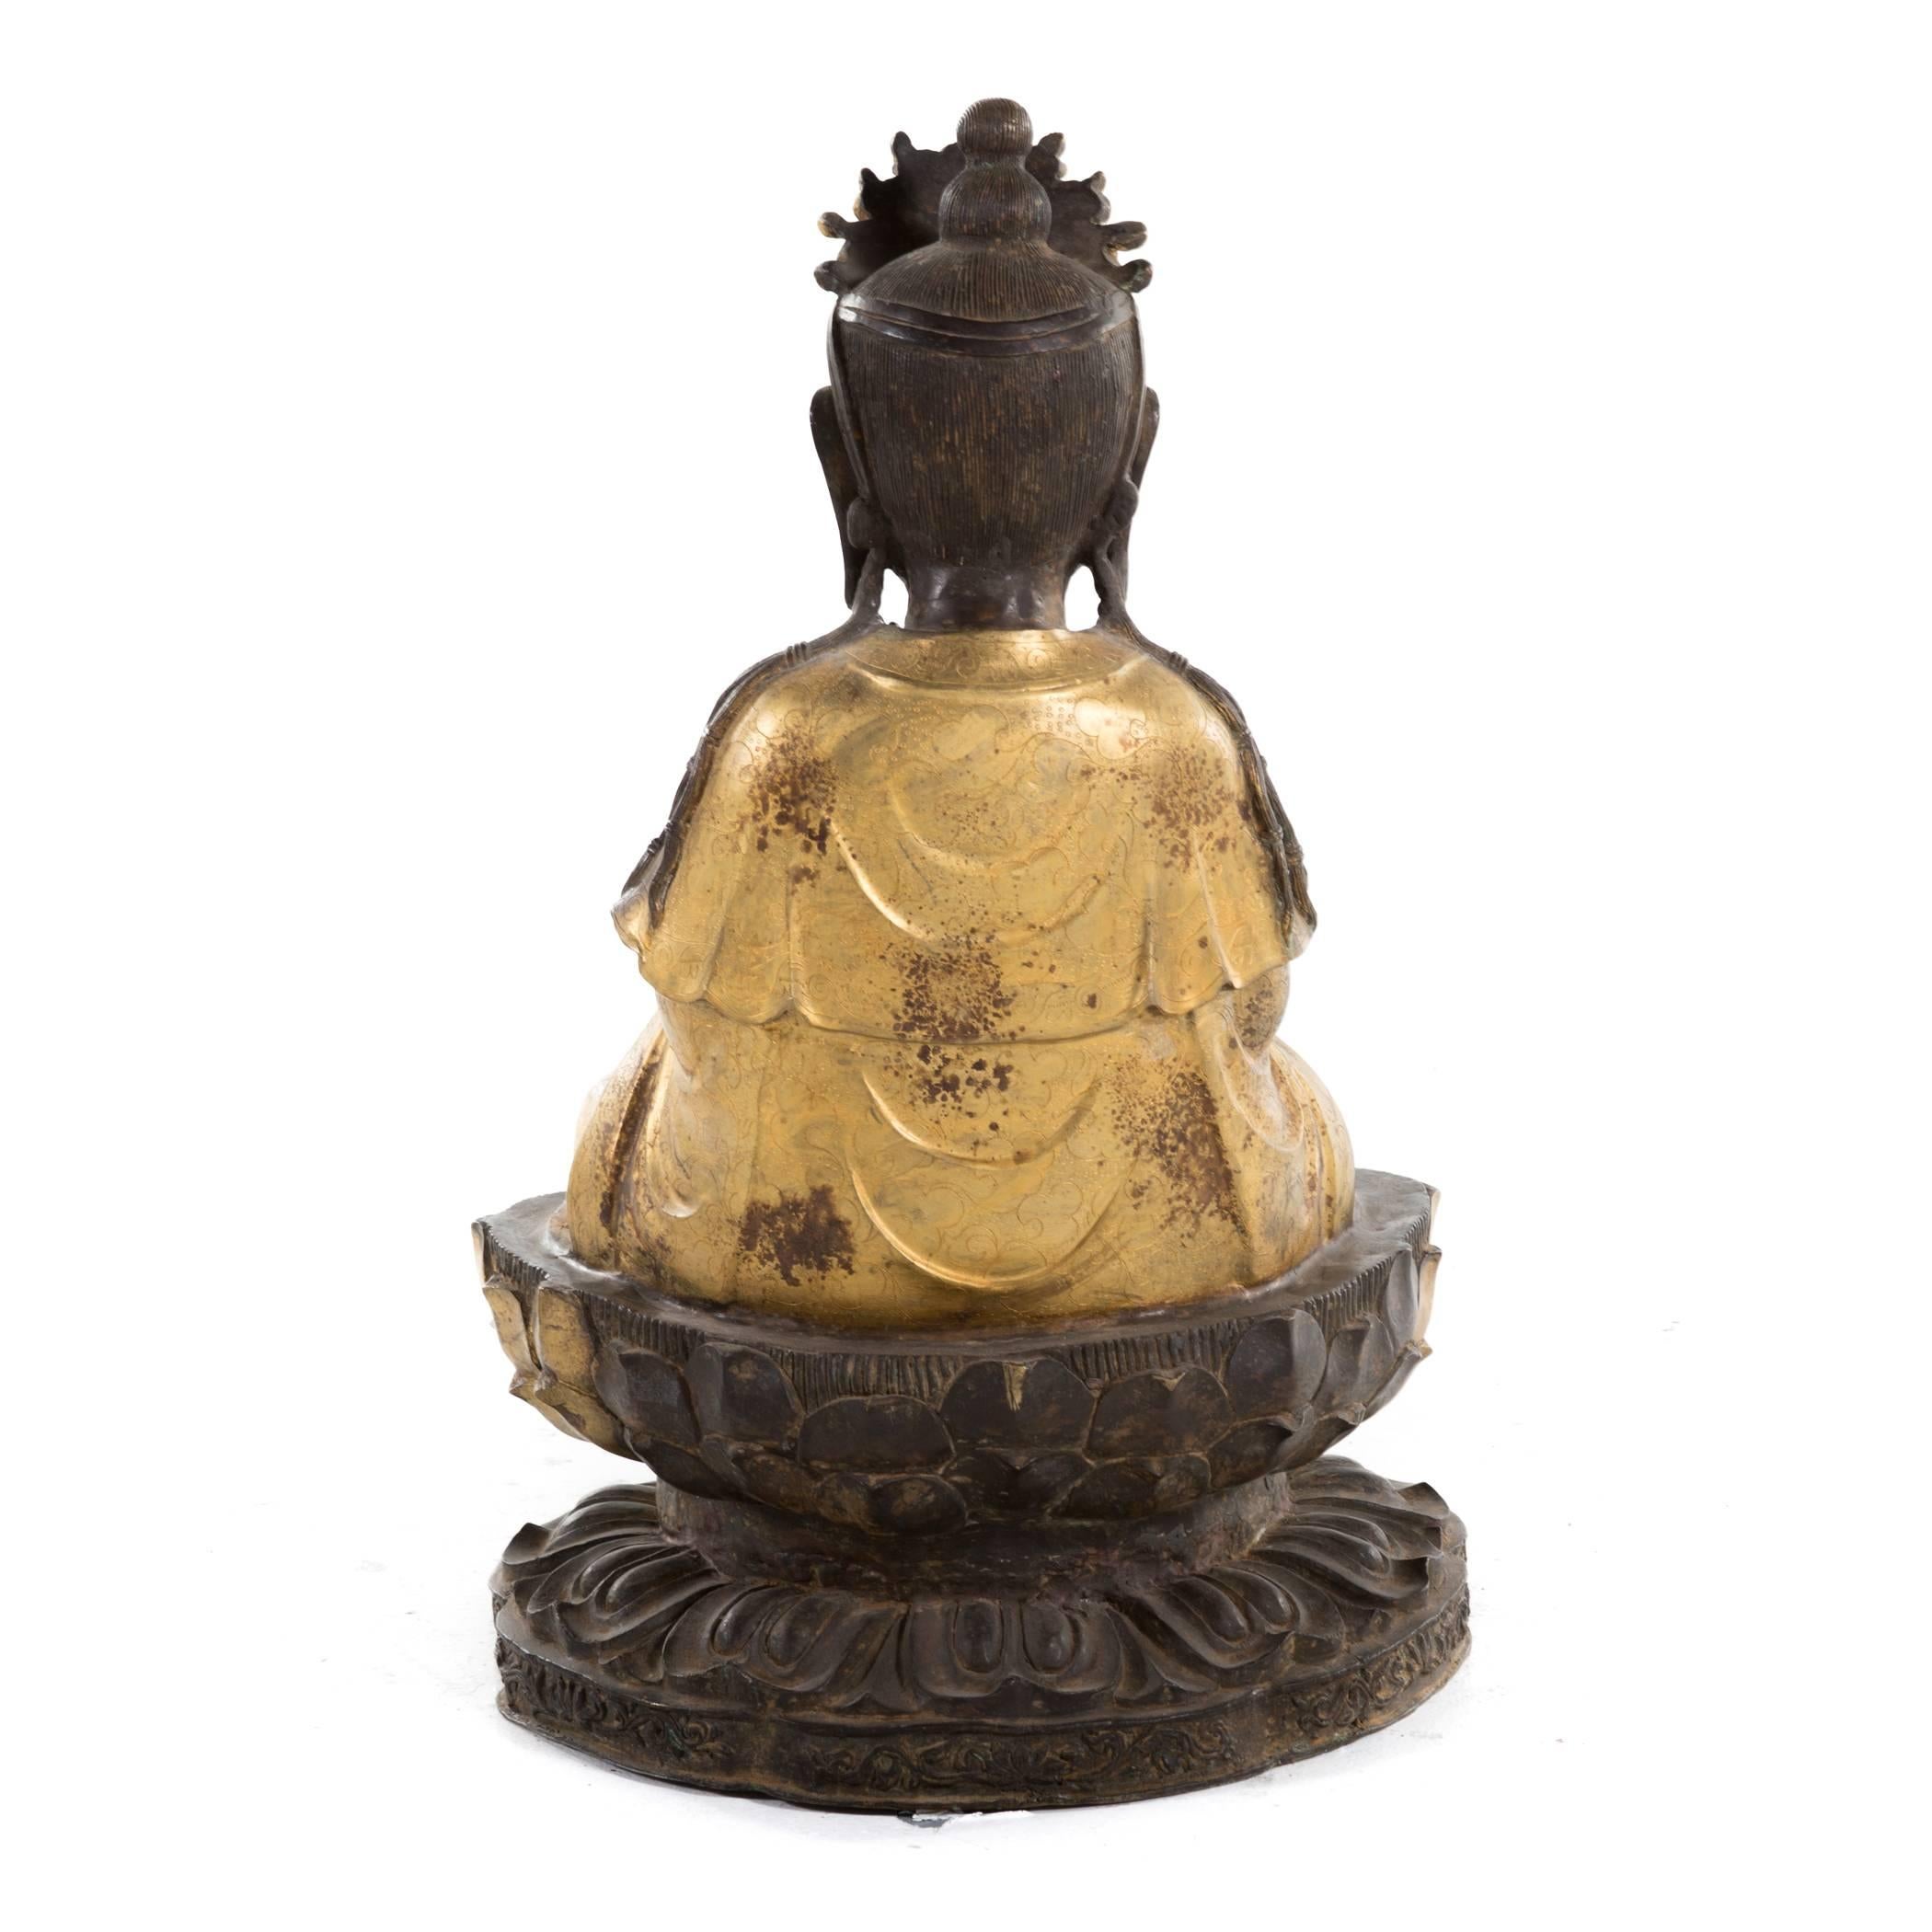 The most beloved subject in the Mahayana Buddhism, Bodhisattva, the one whom driven by great compassion, delayed his/her own Buddhahood to help the others to attain enlightenment. 
Exemplified in this stunning statue, Bodhisattva is often depicted